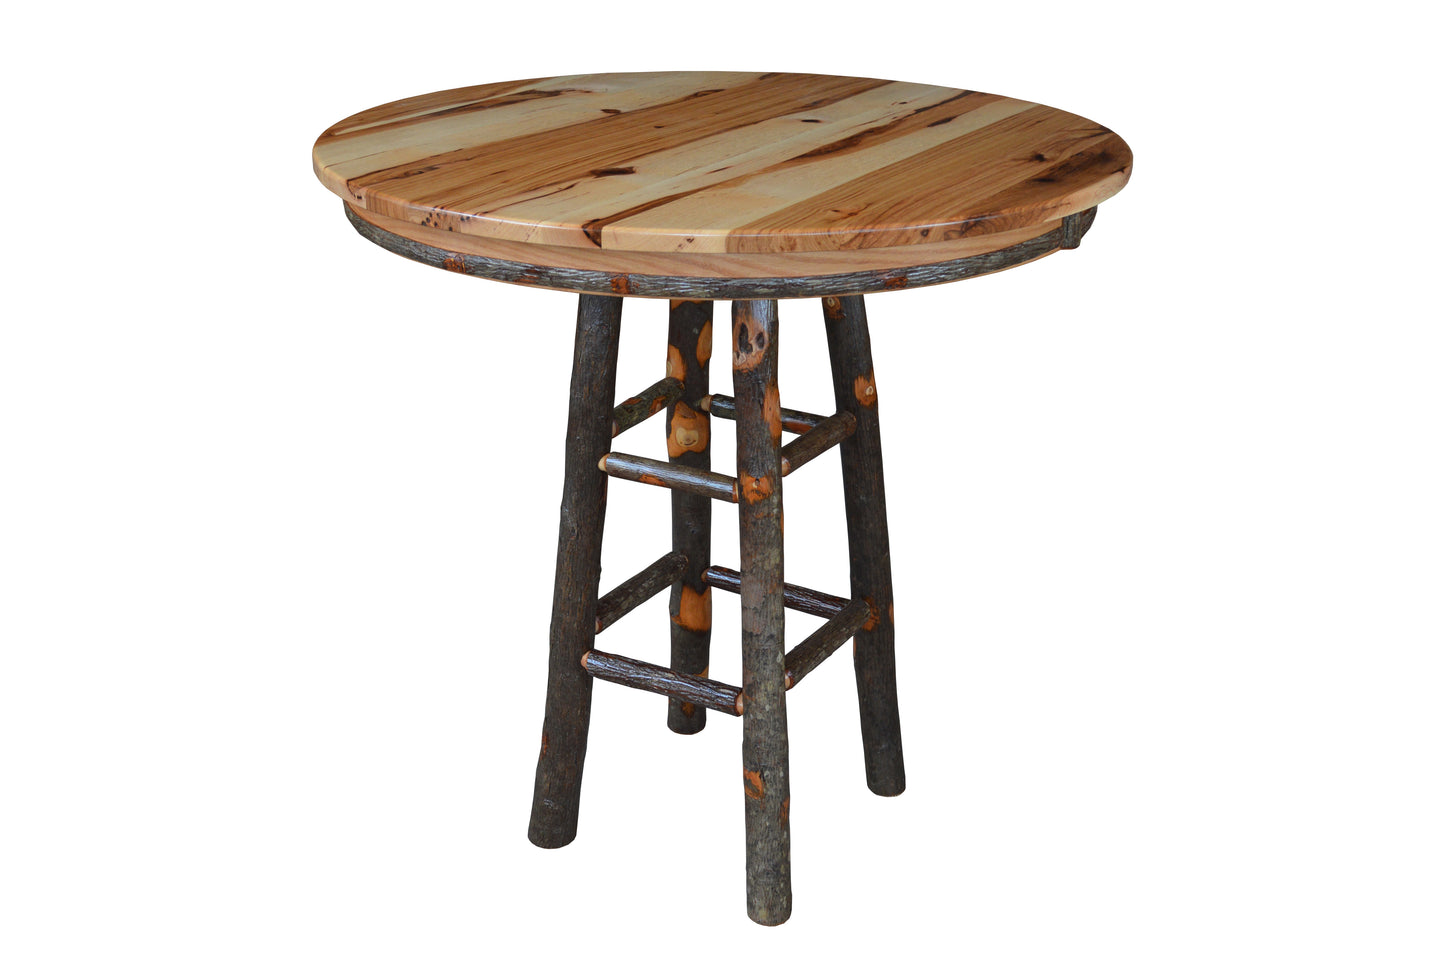 A&L Furniture Co. 42" Round Hickory Bar Table - LEAD TIME TO SHIP 4 WEEKS OR LESS